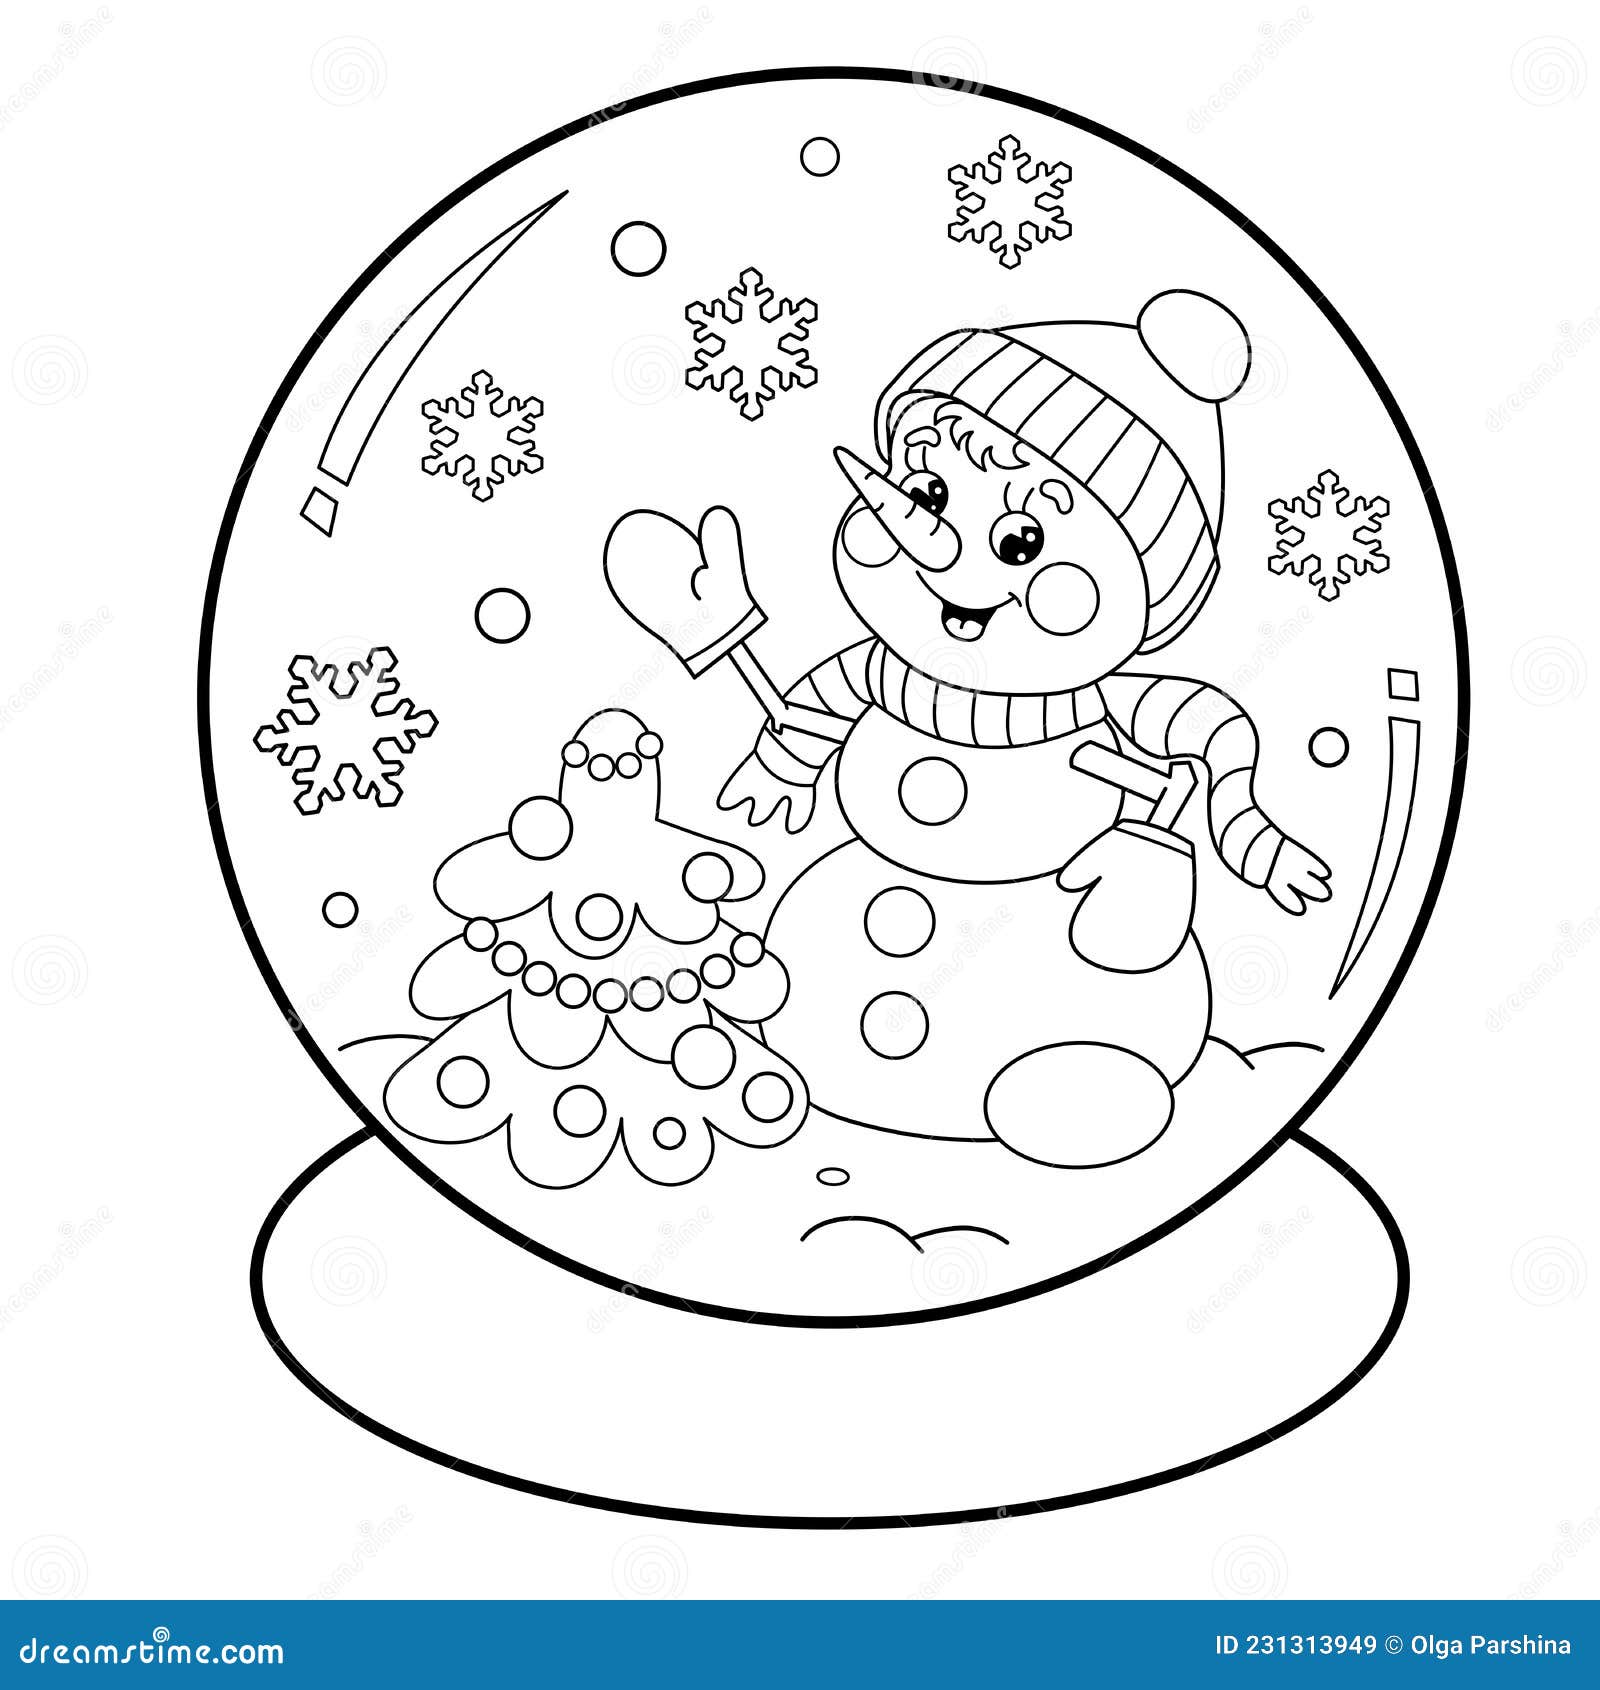 Coloring page outline of snow globe with snowman with christmas tree new year christmas stock vector